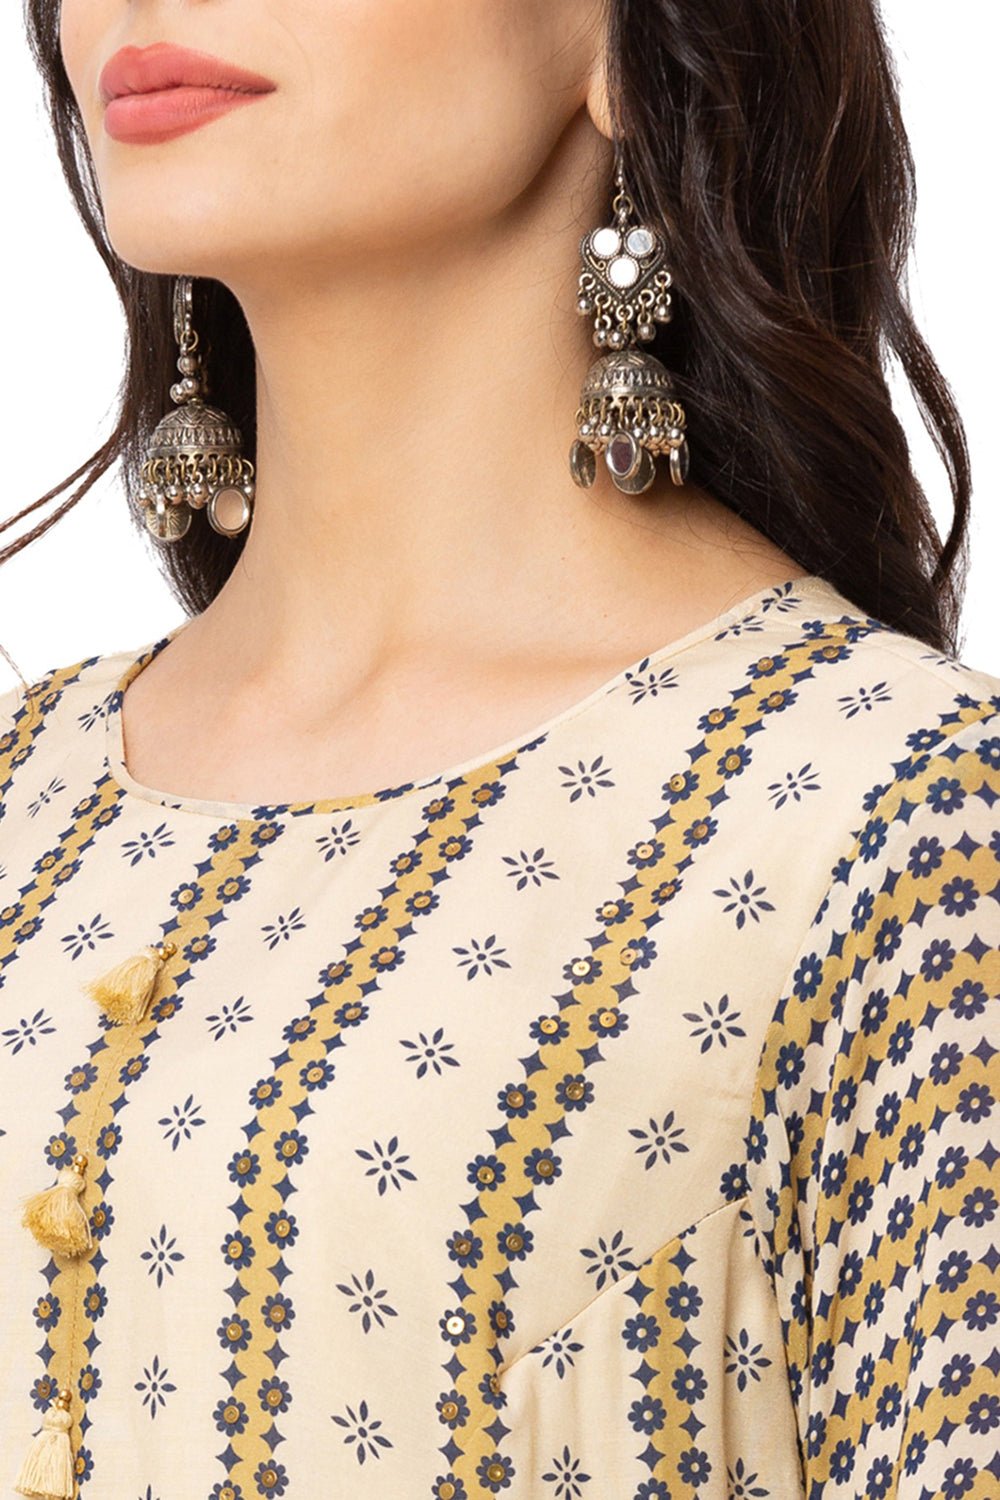 Printed Kurta With Front Slit With Palazzos